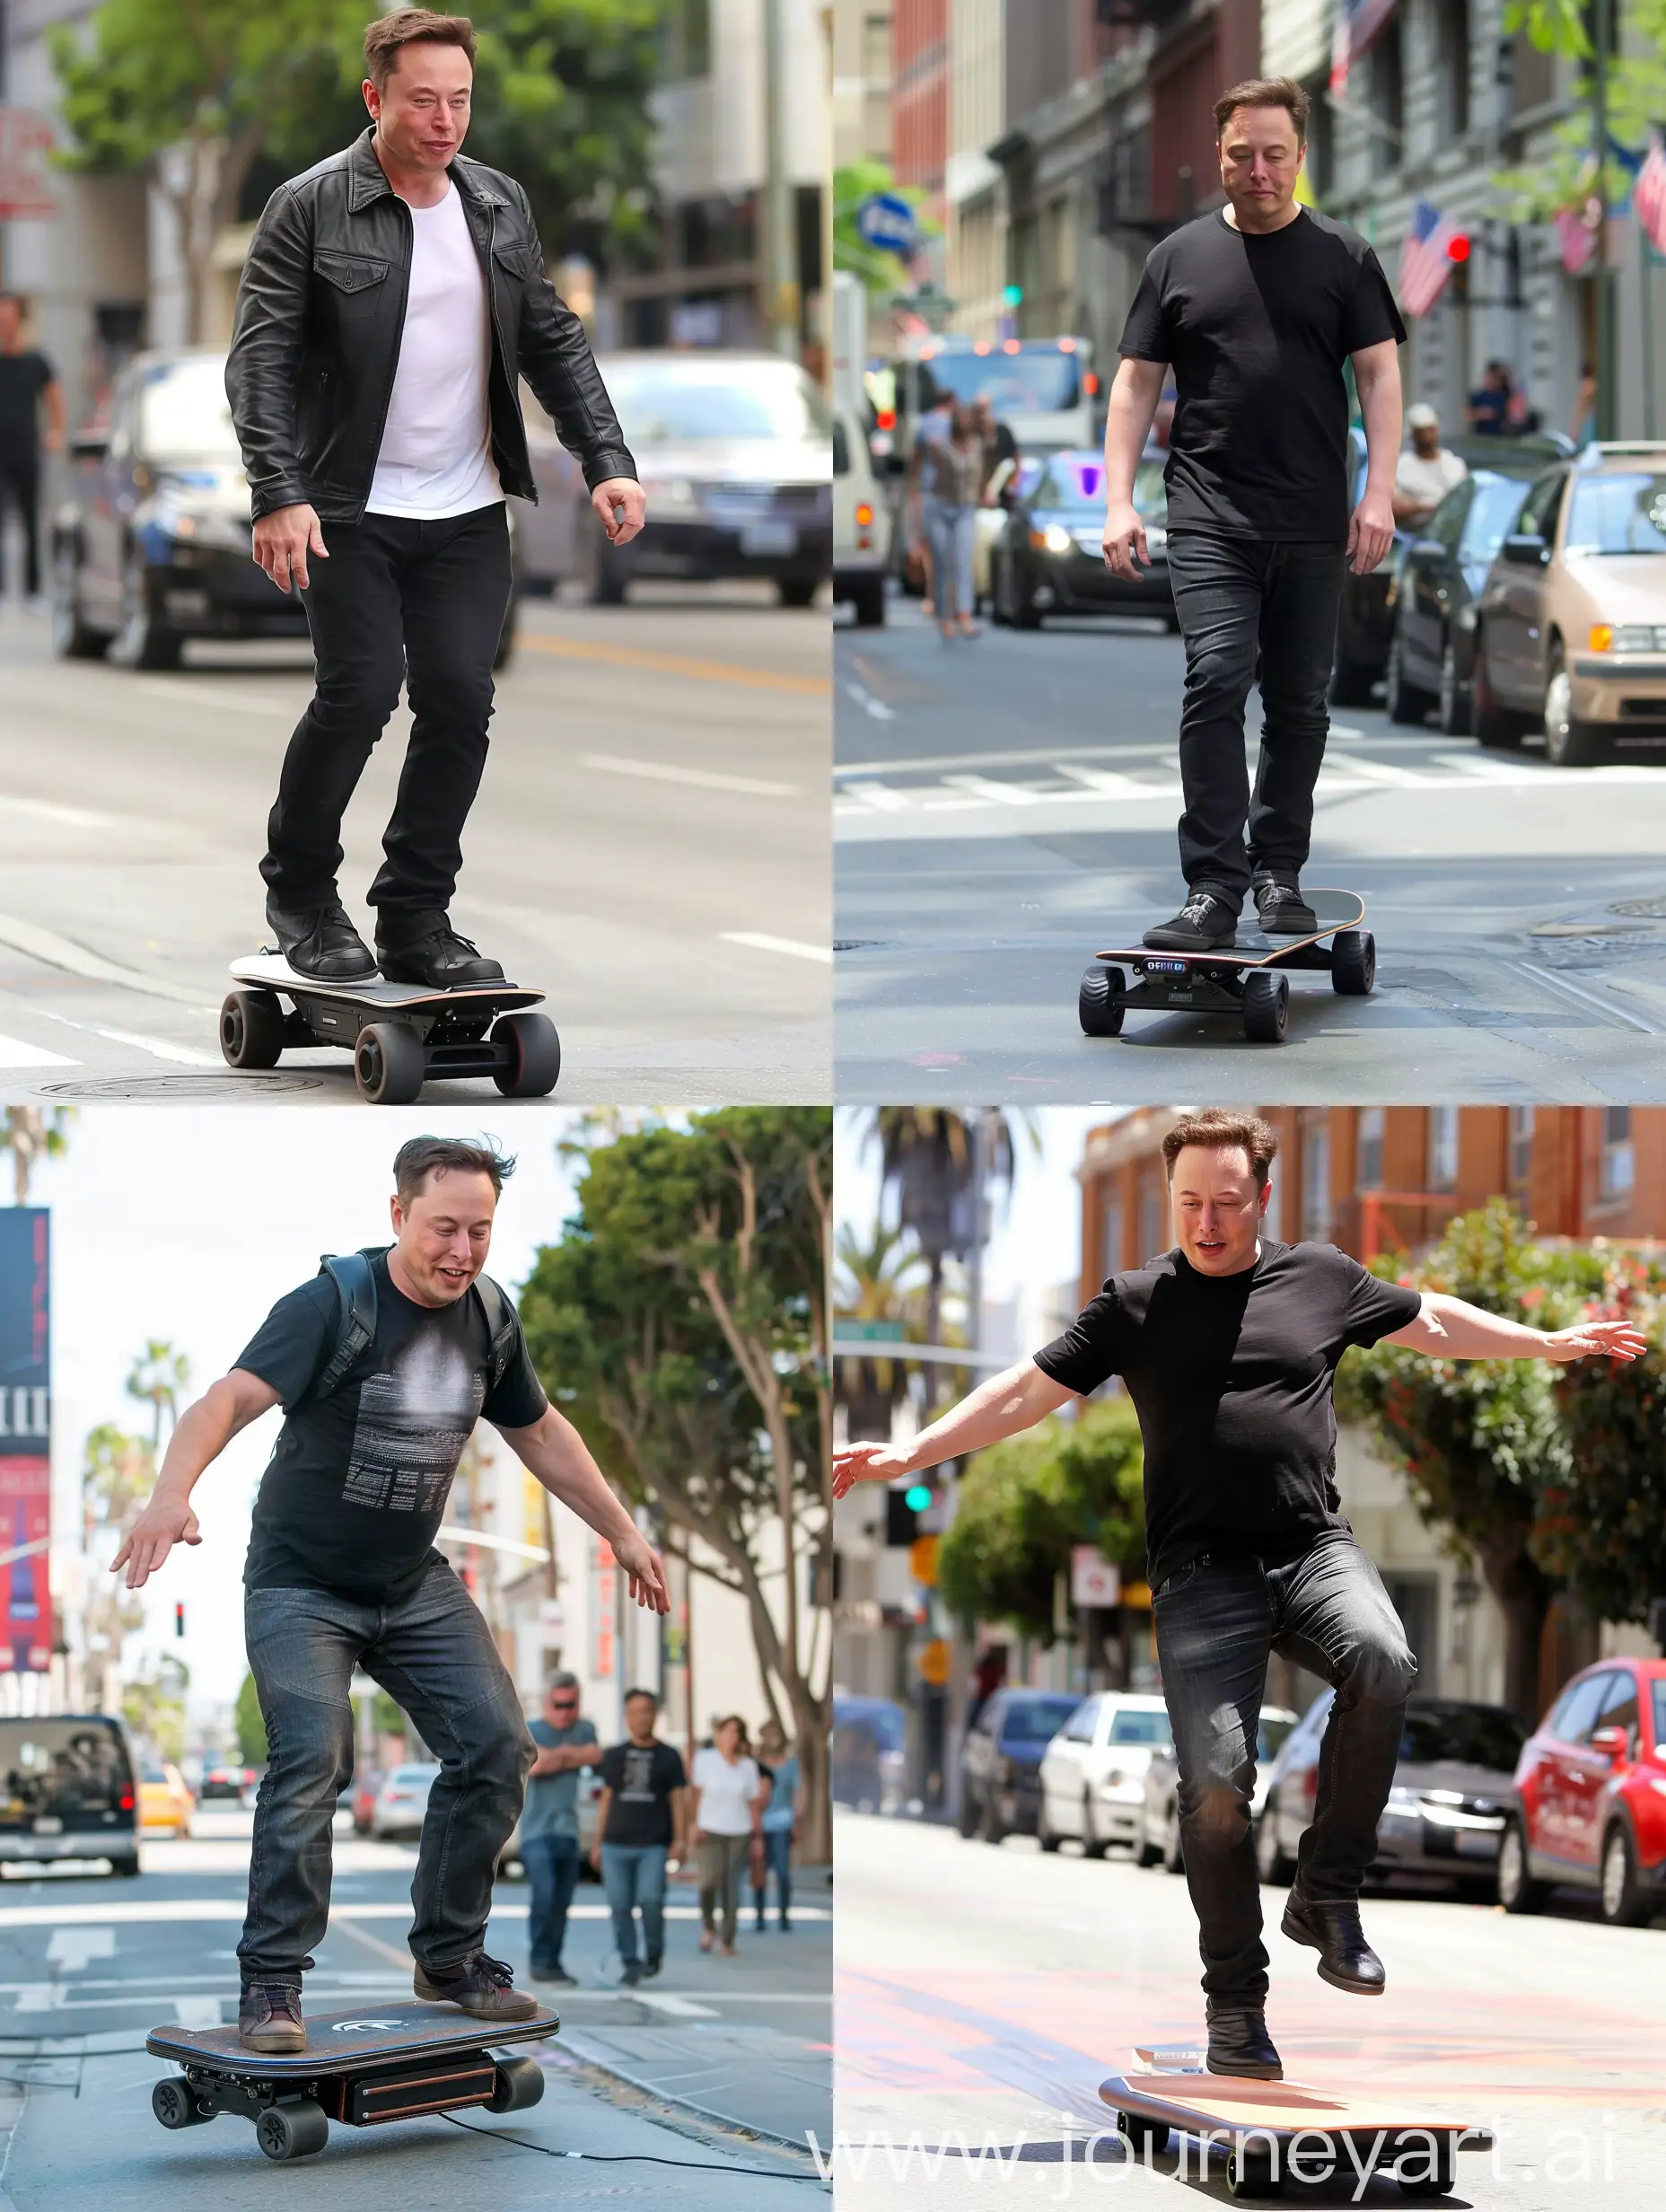 Elon-Musk-on-Hoverboard-Strolling-Urban-Streets-with-Casual-Confidence